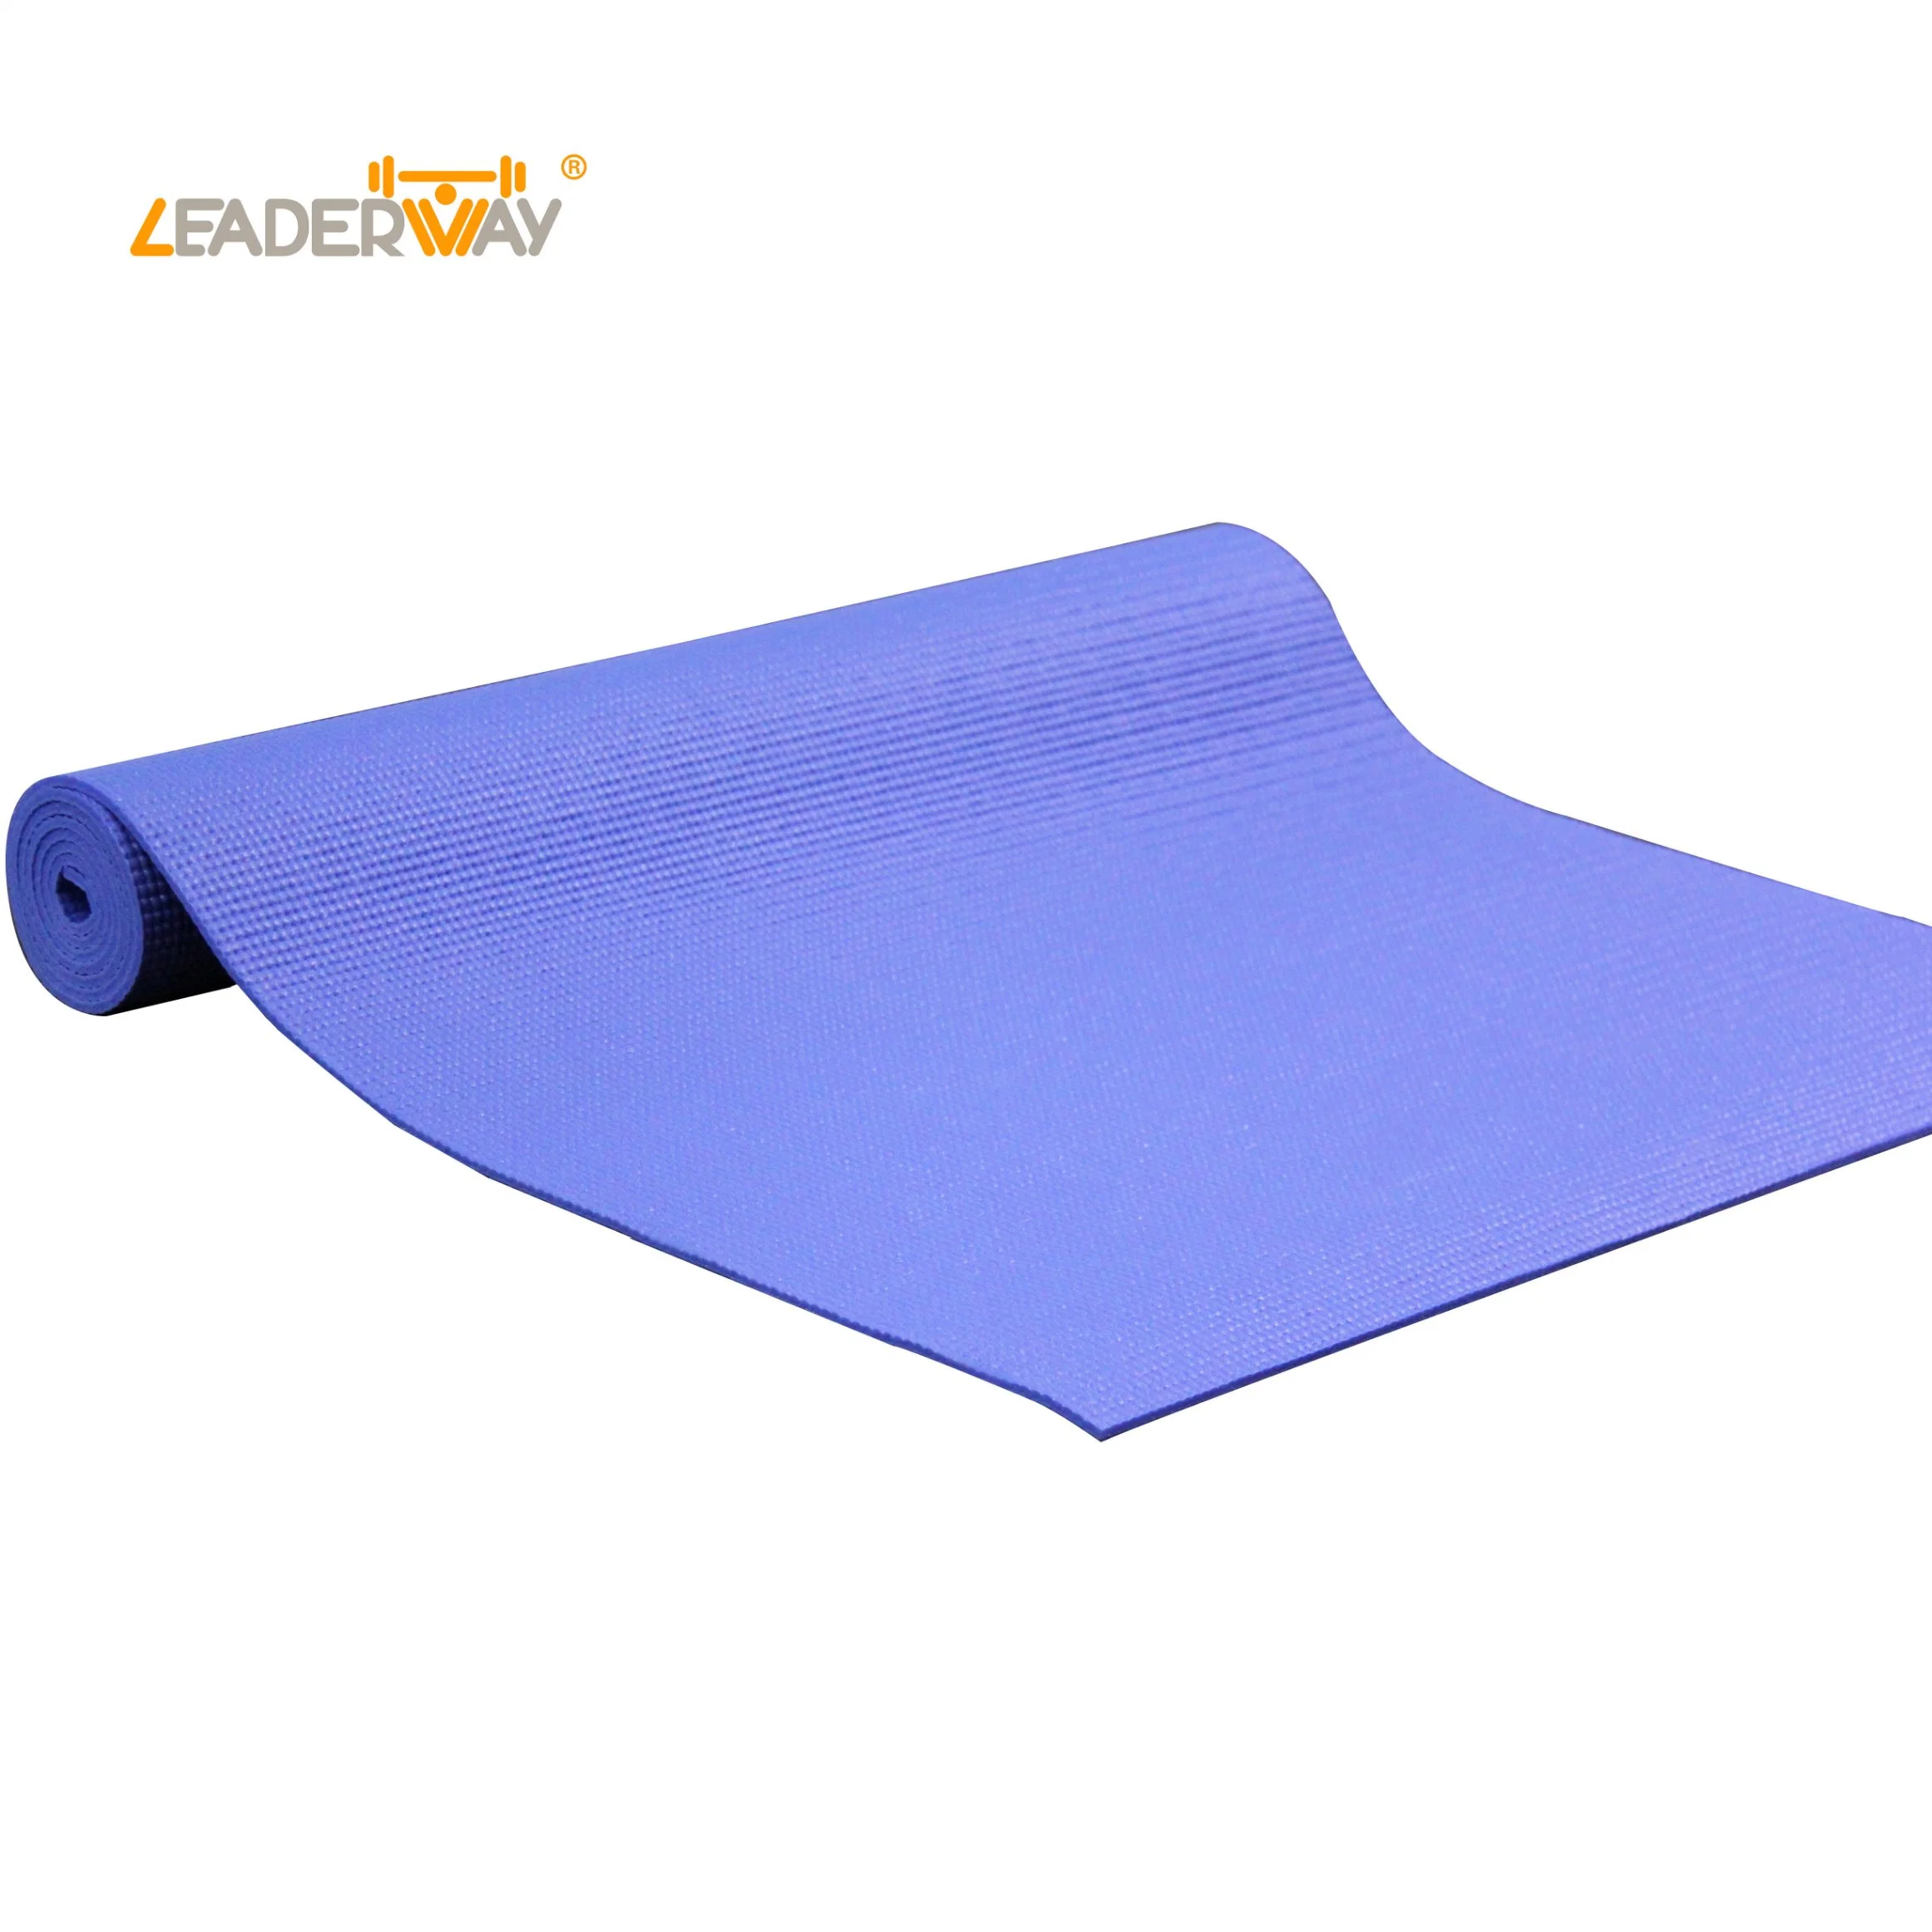 Eco-Friendly Thickness Anti Slip Natural Rubber Waterproof PVC Mat Printed Floor Foam Mat Home Gym Yoga Accessories Fitness Exercise Mat